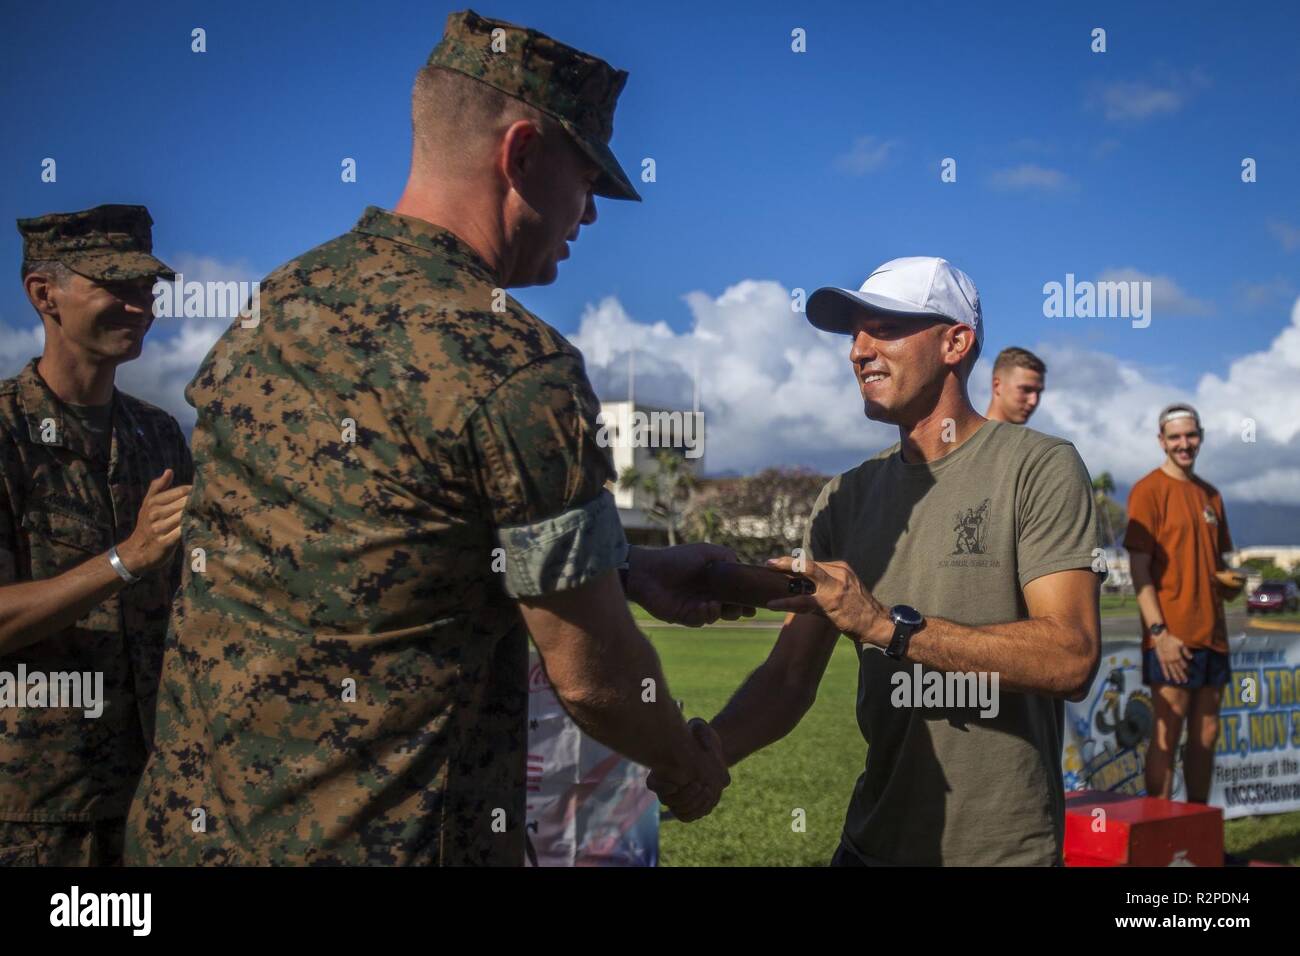 U.S. Marine Corps Sgt. Maj. Mark Shawhan, sergeant major, 3rd Radio Battalion, awards Humberto Baeza, the overall first place winner of the Turkey Trot 10k, during the Turkey Trot 5k and 10k run, Marine Corps Base Hawaii, Nov. 3, 2018. The event, hosted by 3rd Radio Battalion and Marine Corps Community Services Hawaii, is an annual Thanksgiving-themed event that is open to U.S. Service members, their families, and civilian participants. The event promotes readiness and resiliency across the installation and local community by encouraging healthy, family-oriented activity. Stock Photo